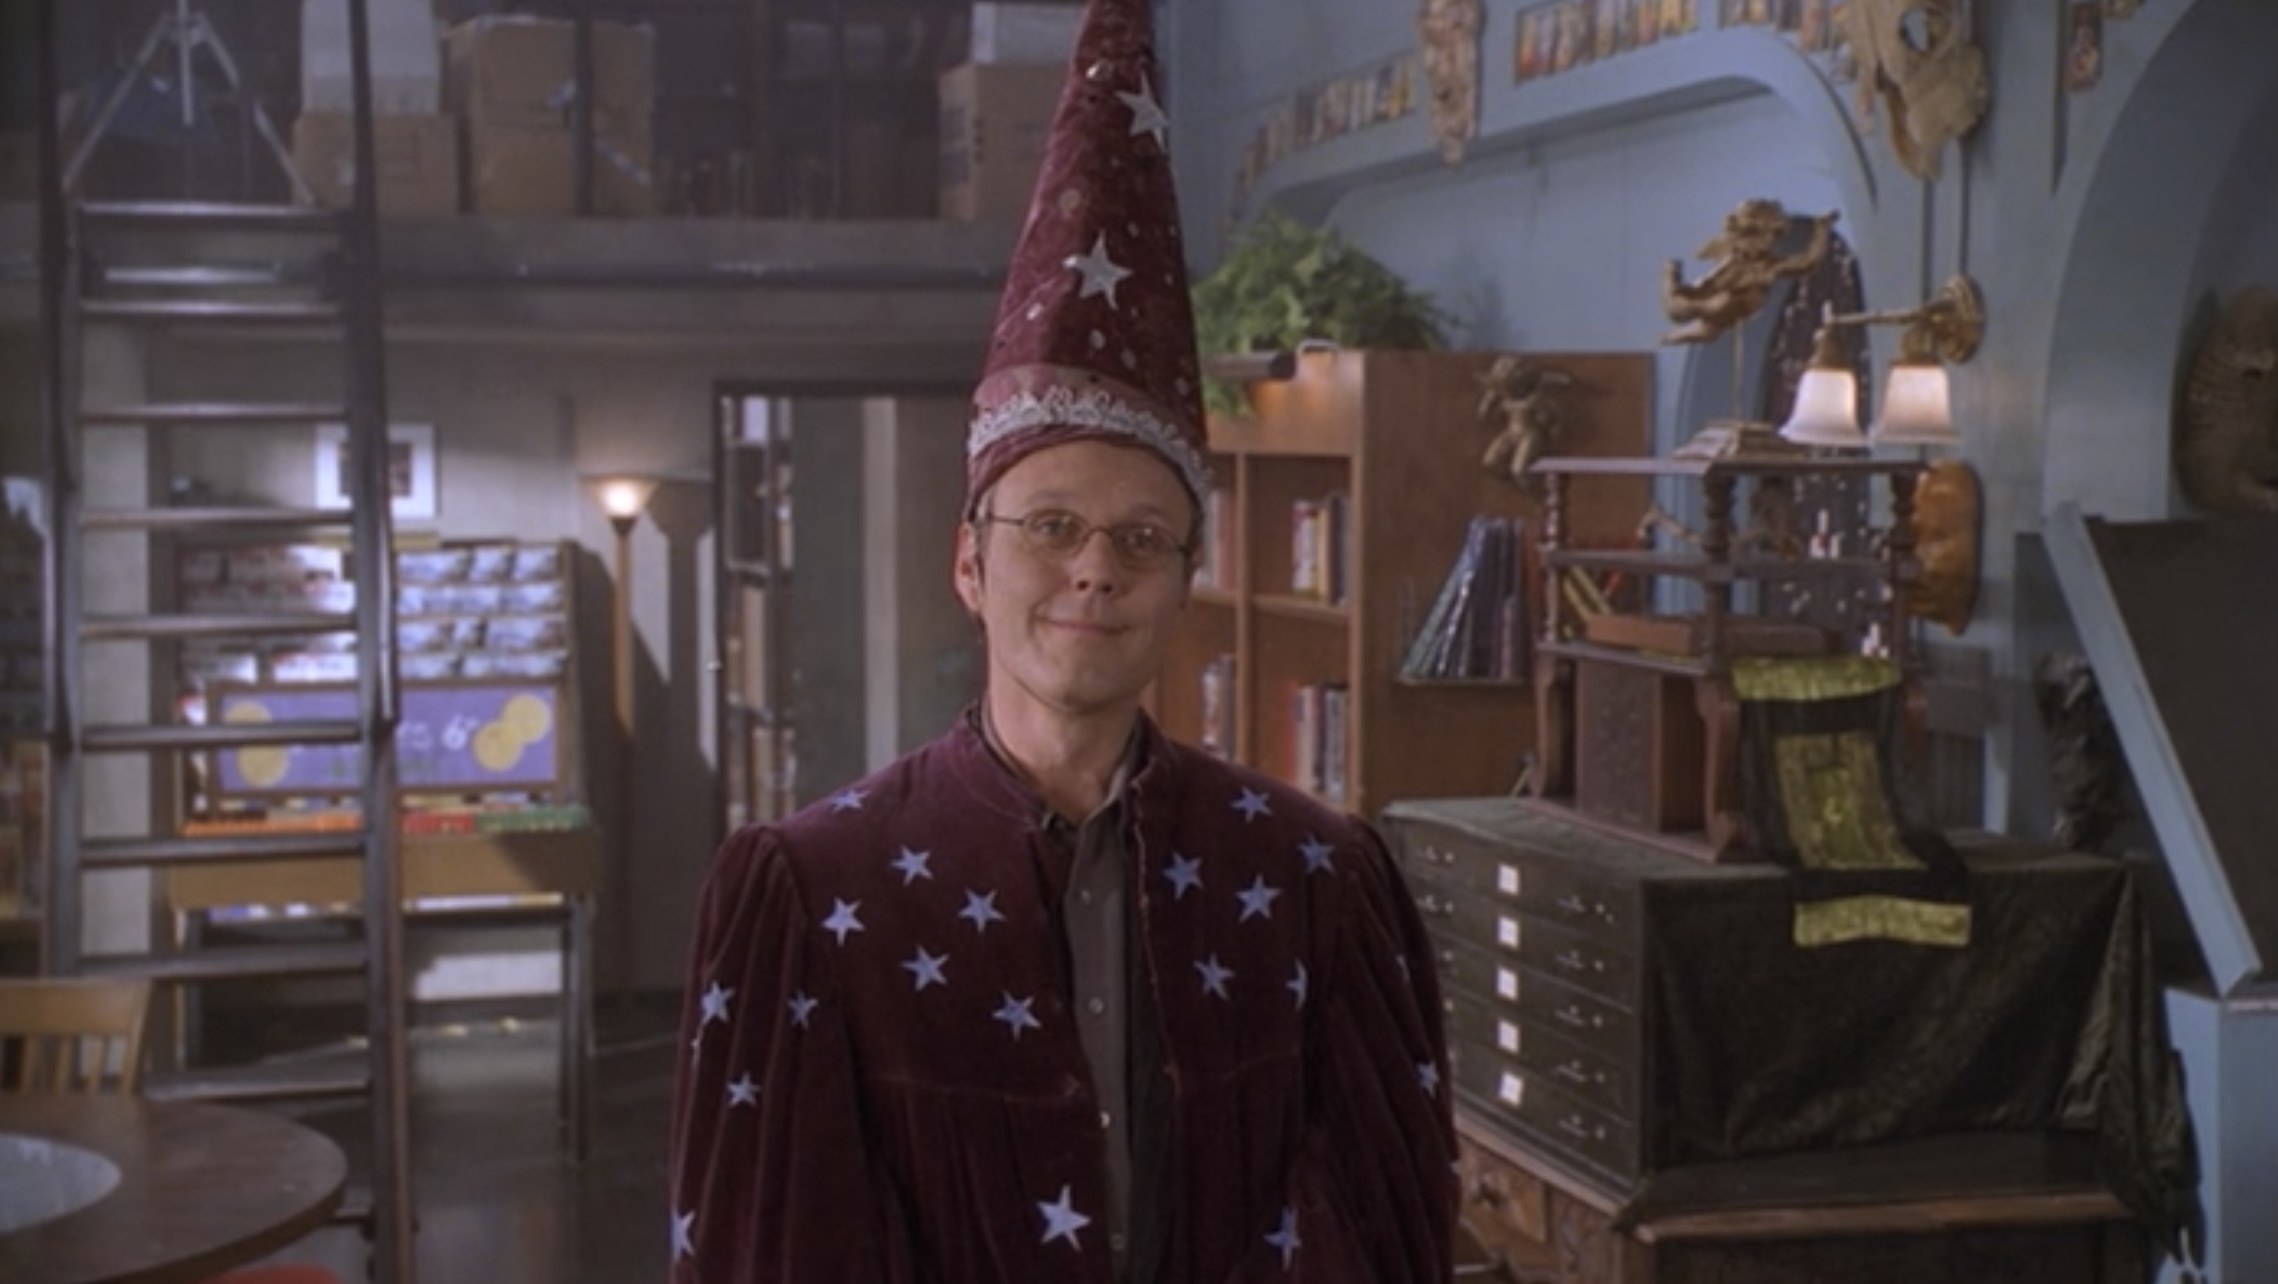 Giles dressed as a wizard on Buffy the Vampire Slayer